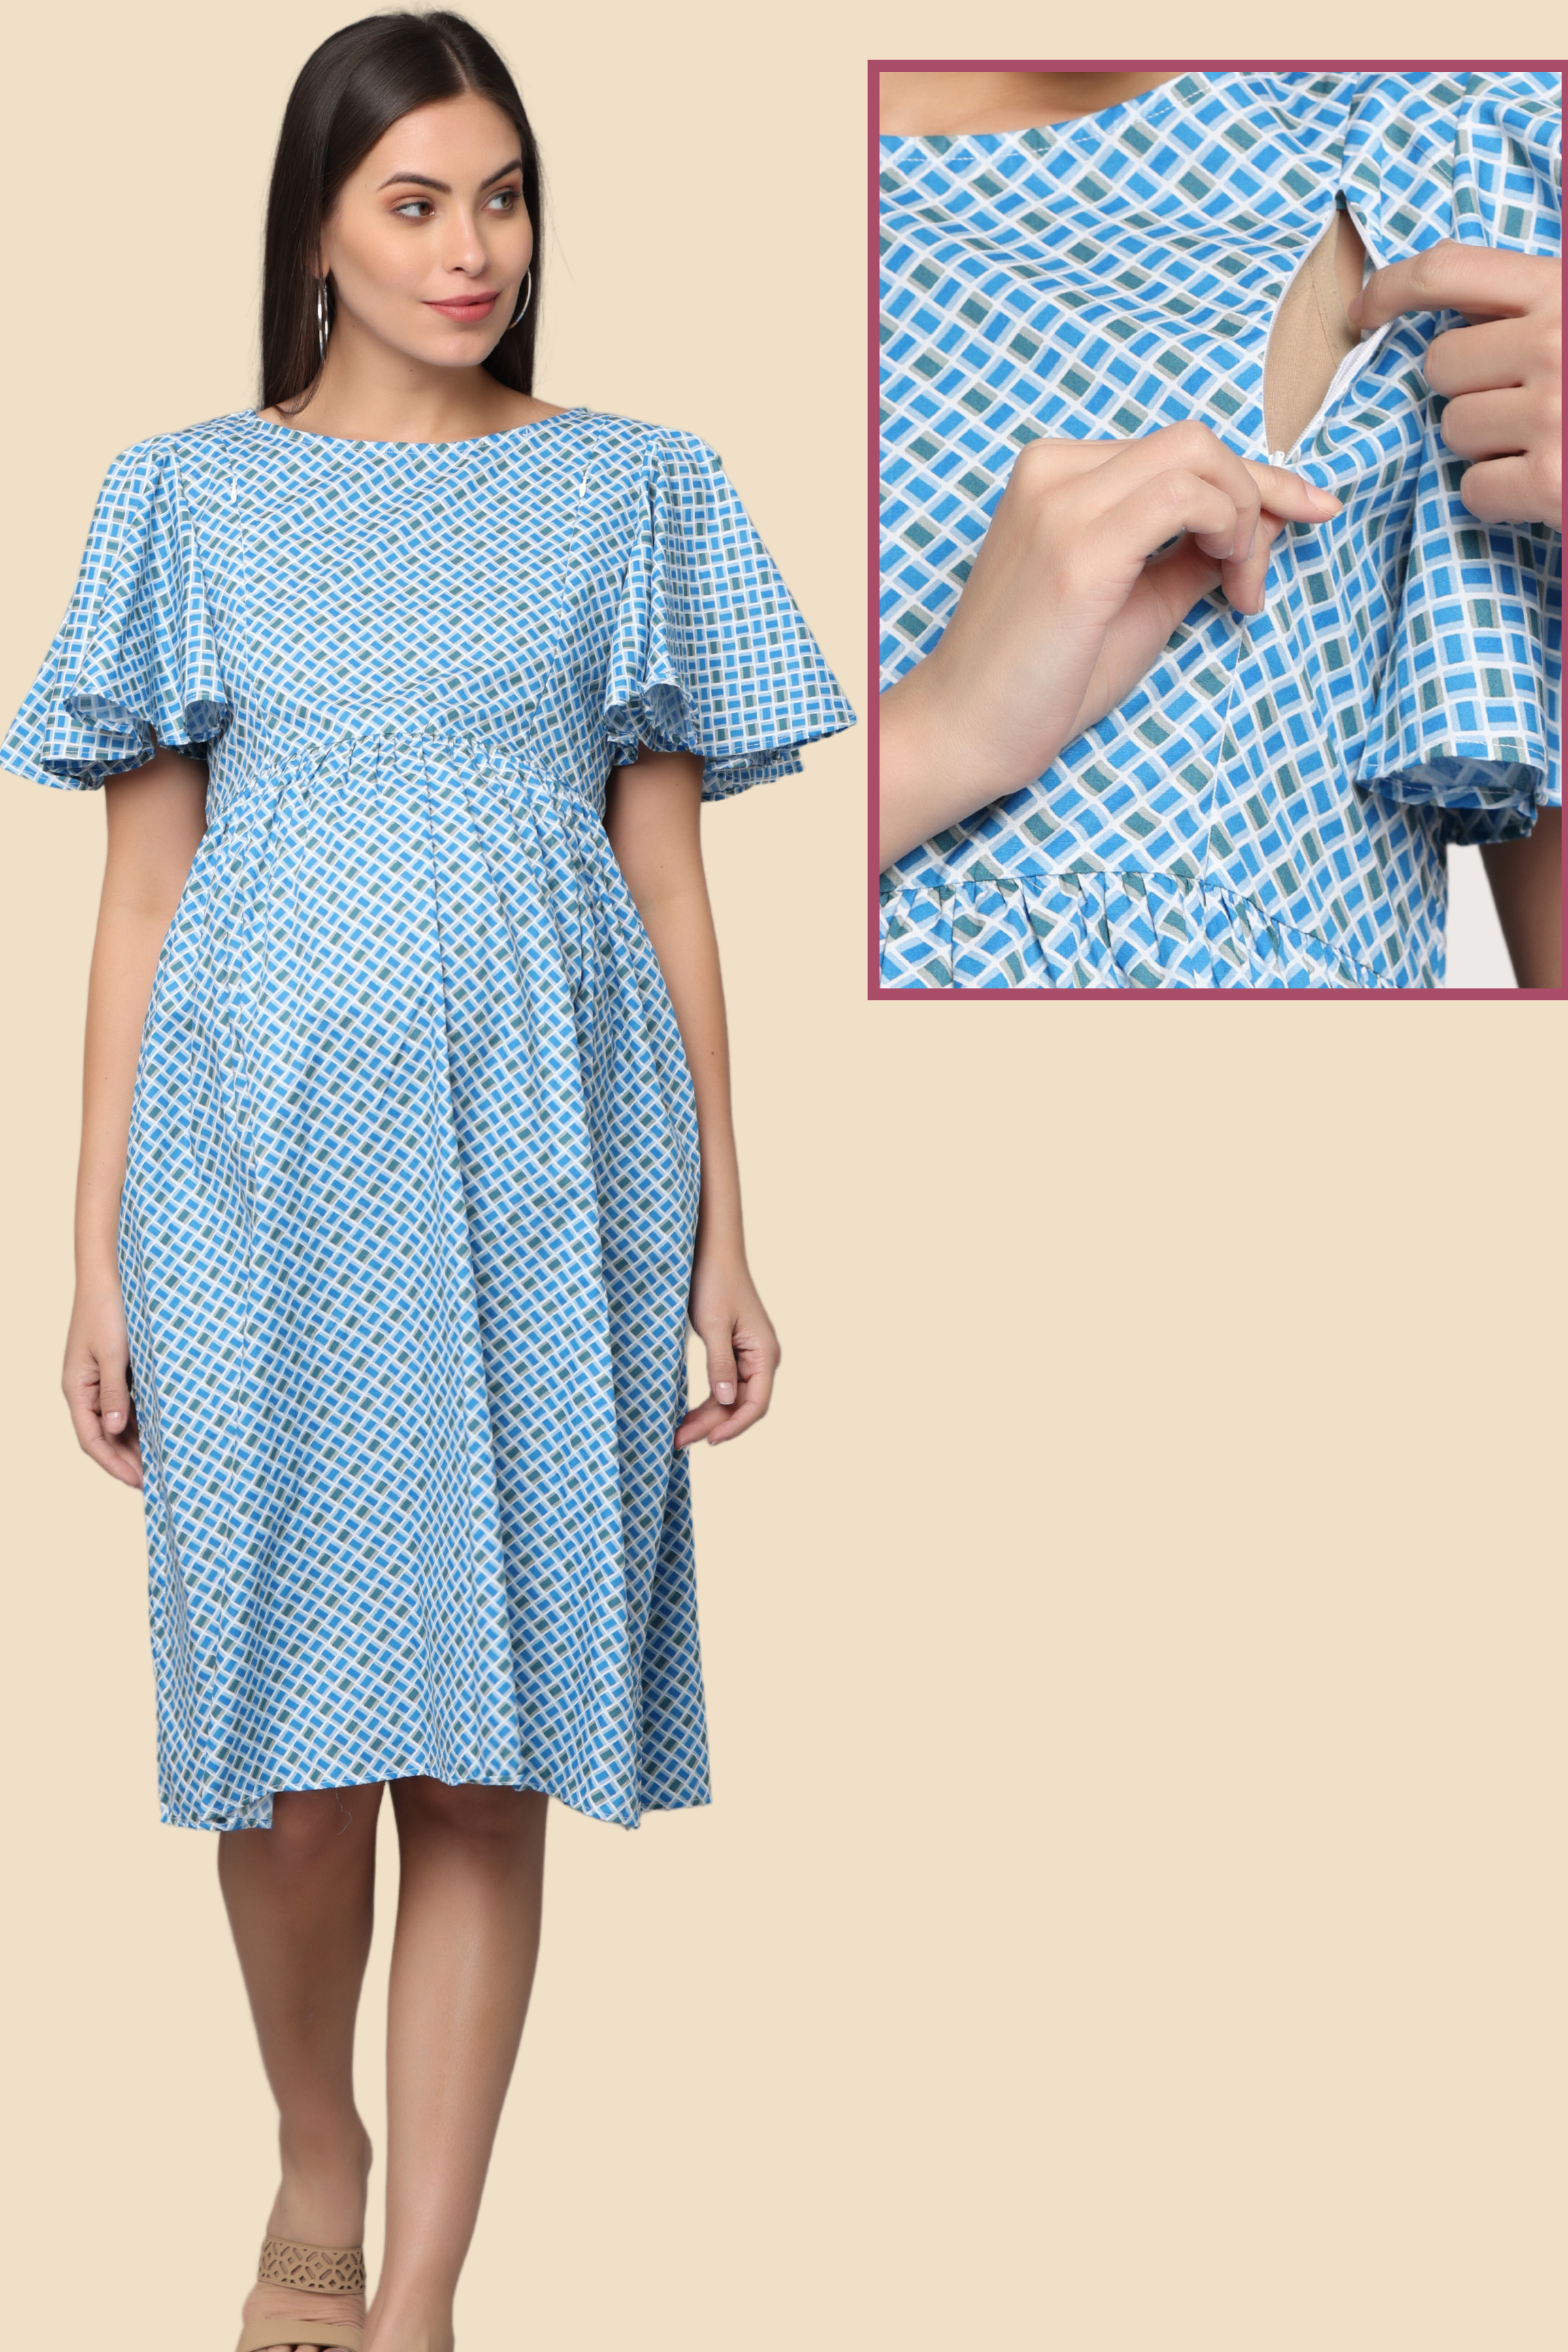 Nursing Gowns&Maternity Dresses That Combine Comfort&Style To Make  Breastfeeding Easier